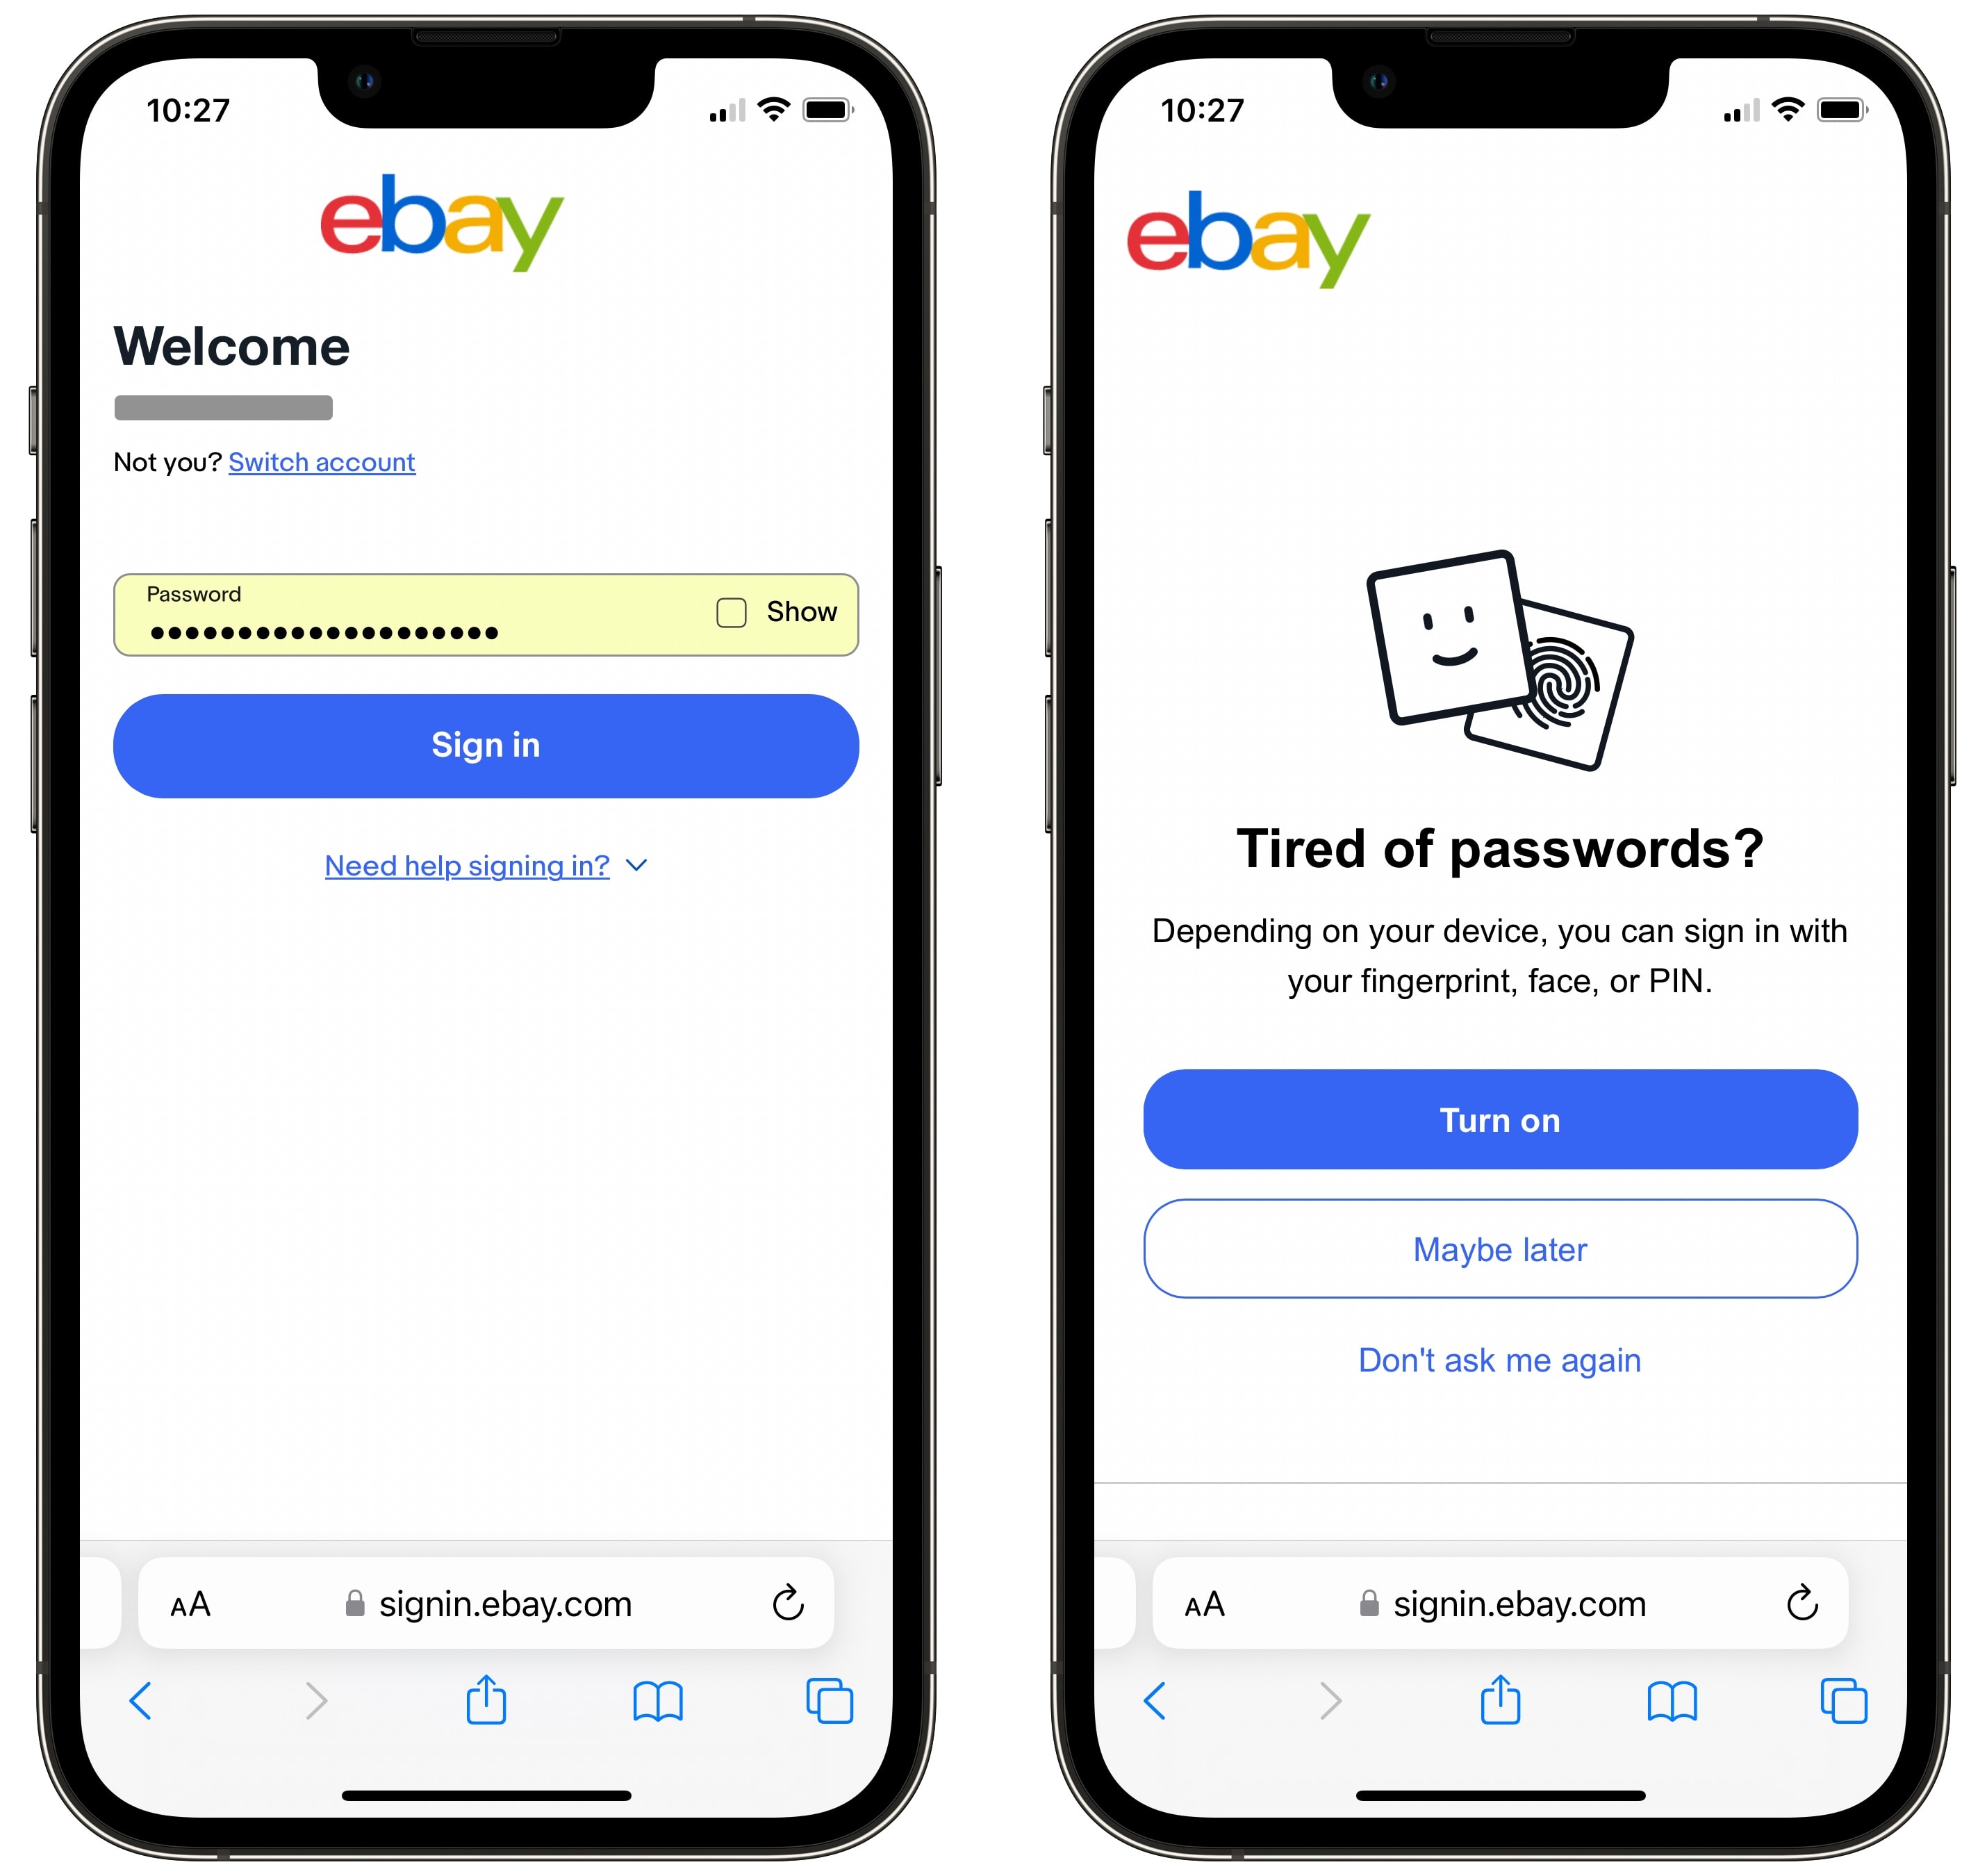 Prompt “Tired of passwords? Depending on your device, you can sign in with your fingerprint, face, or PIN” with options “Turn on” or “Maybe later"